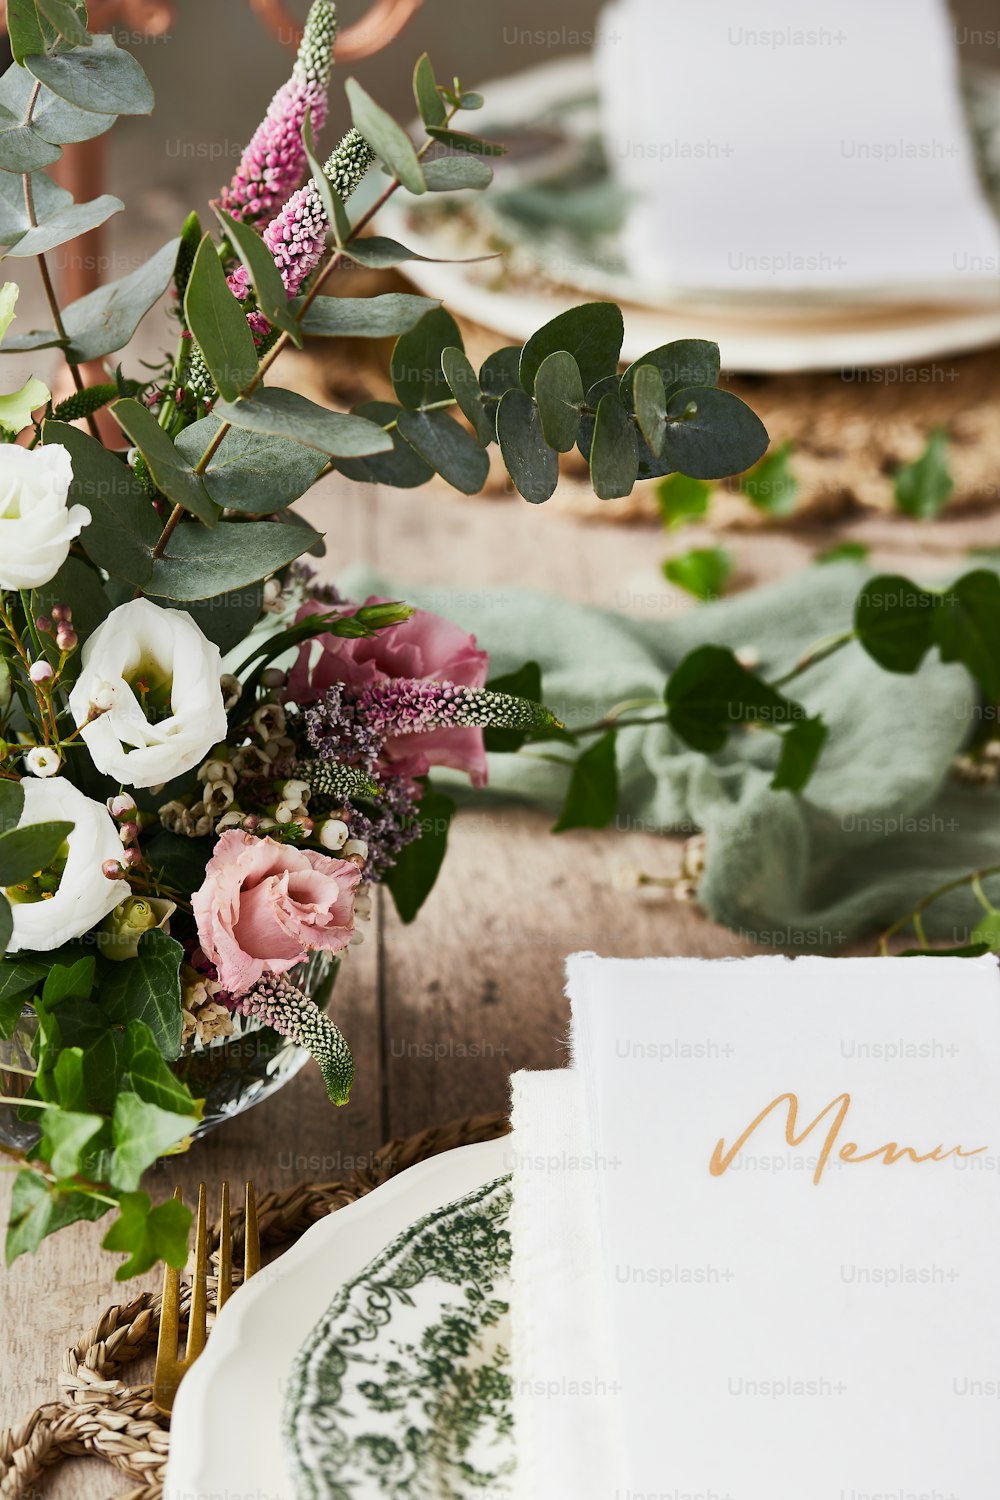 a table setting with a menu and flowers in a vase